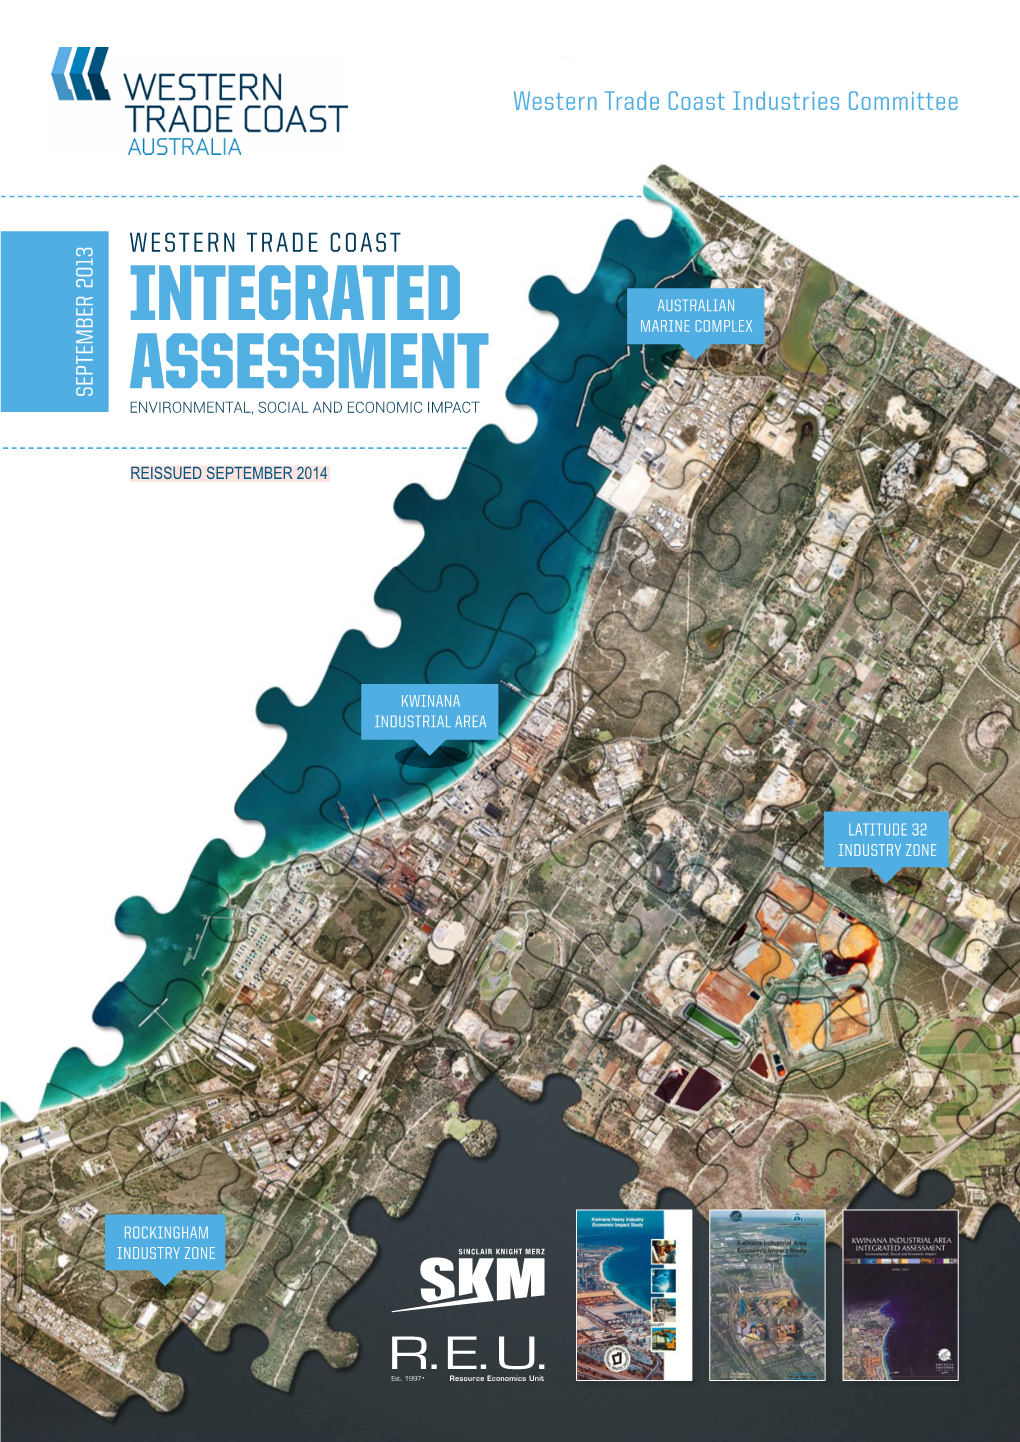 Western Trade Coast Integrated Assessment – Environmental, Social and Economic Impact